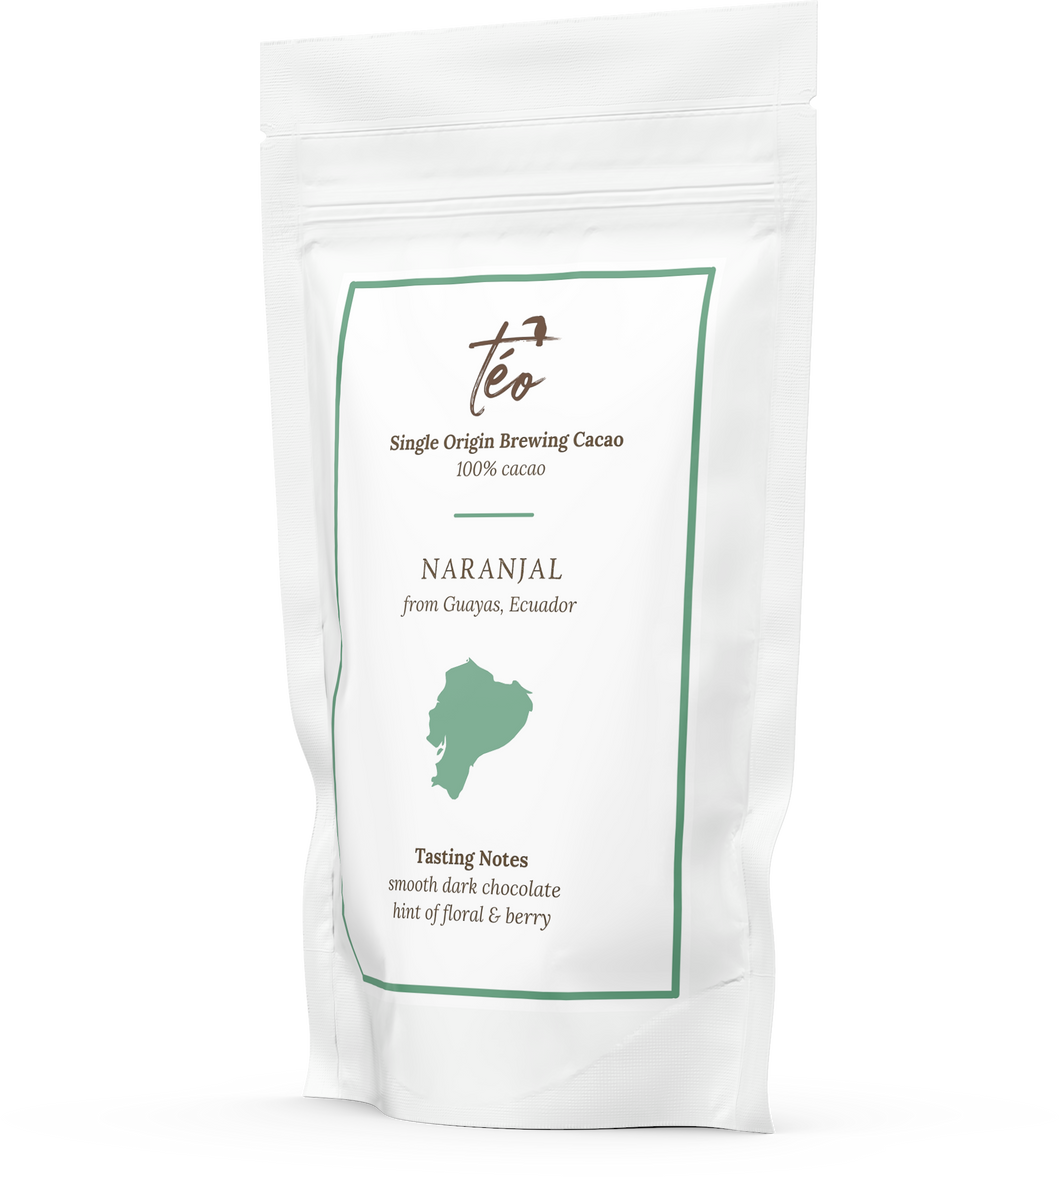 The Naranjál Brewing Cacao is from Ecuador. It tastes of smooth dark chocolate with hints of floral and berry!